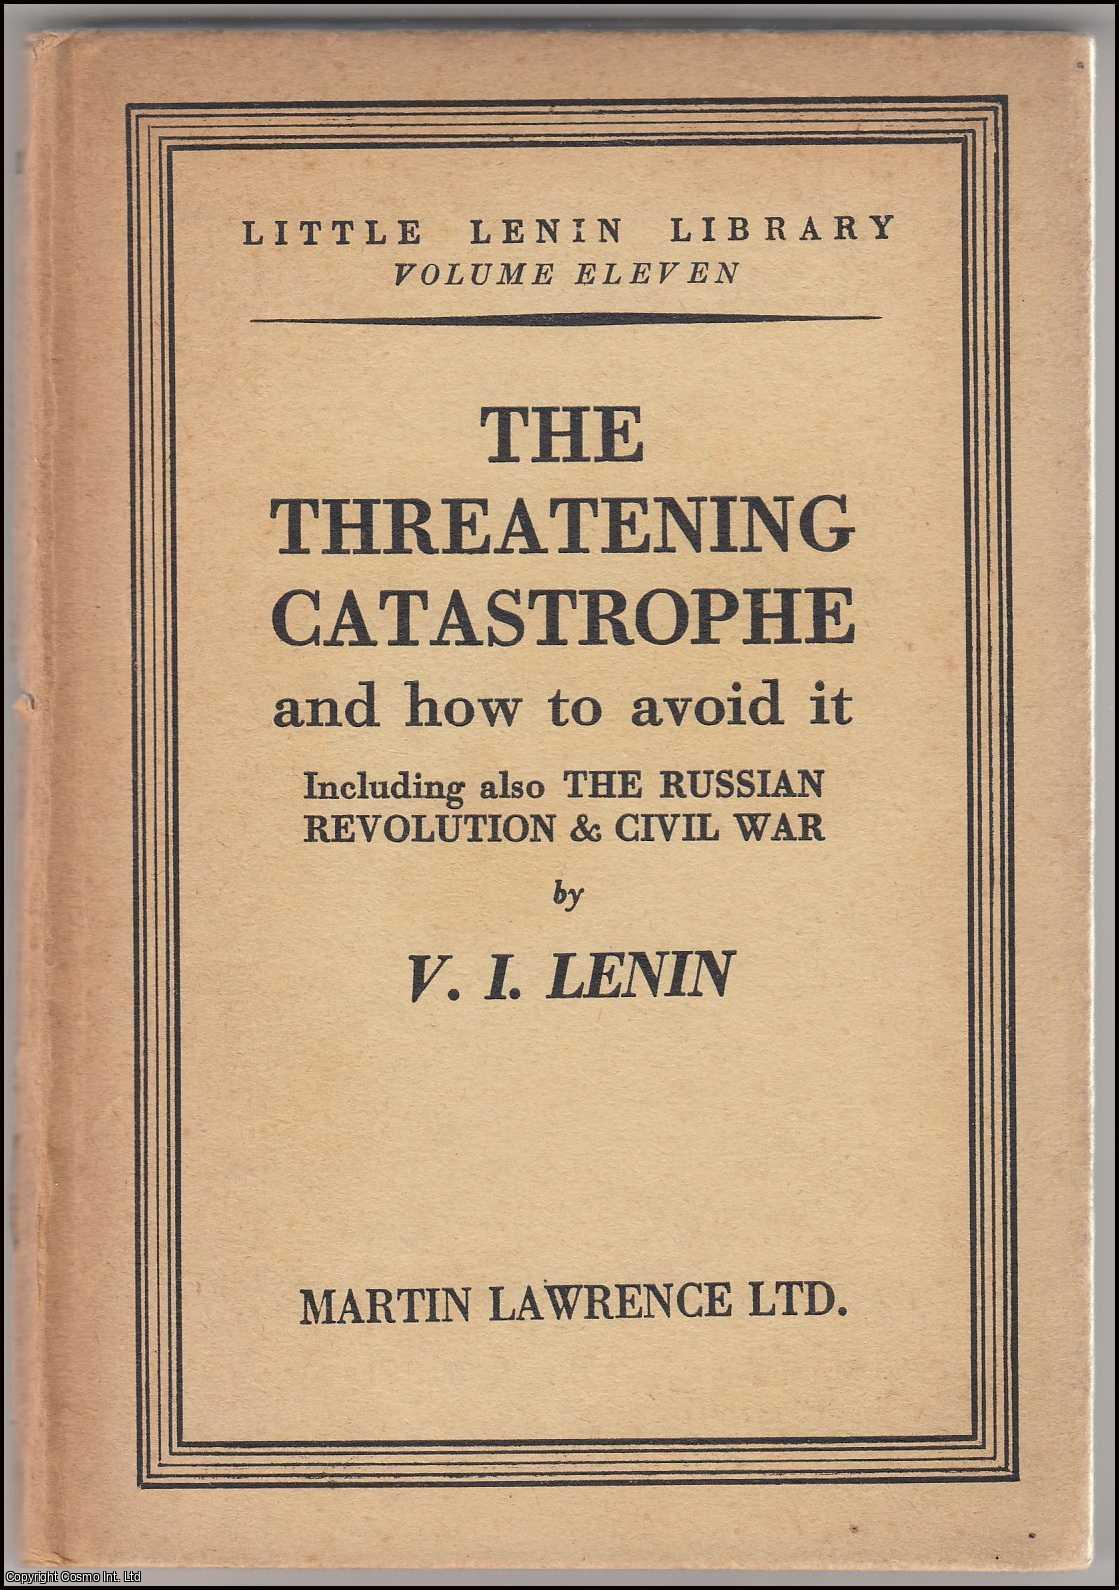 V.I. Lenin - The Threatening Catastrophe and how to avoid it. Including also The Russian Revolution and Civil War. Little Lenin Library, Volume Eleven. Published by Martin Lawrence, c.1940.